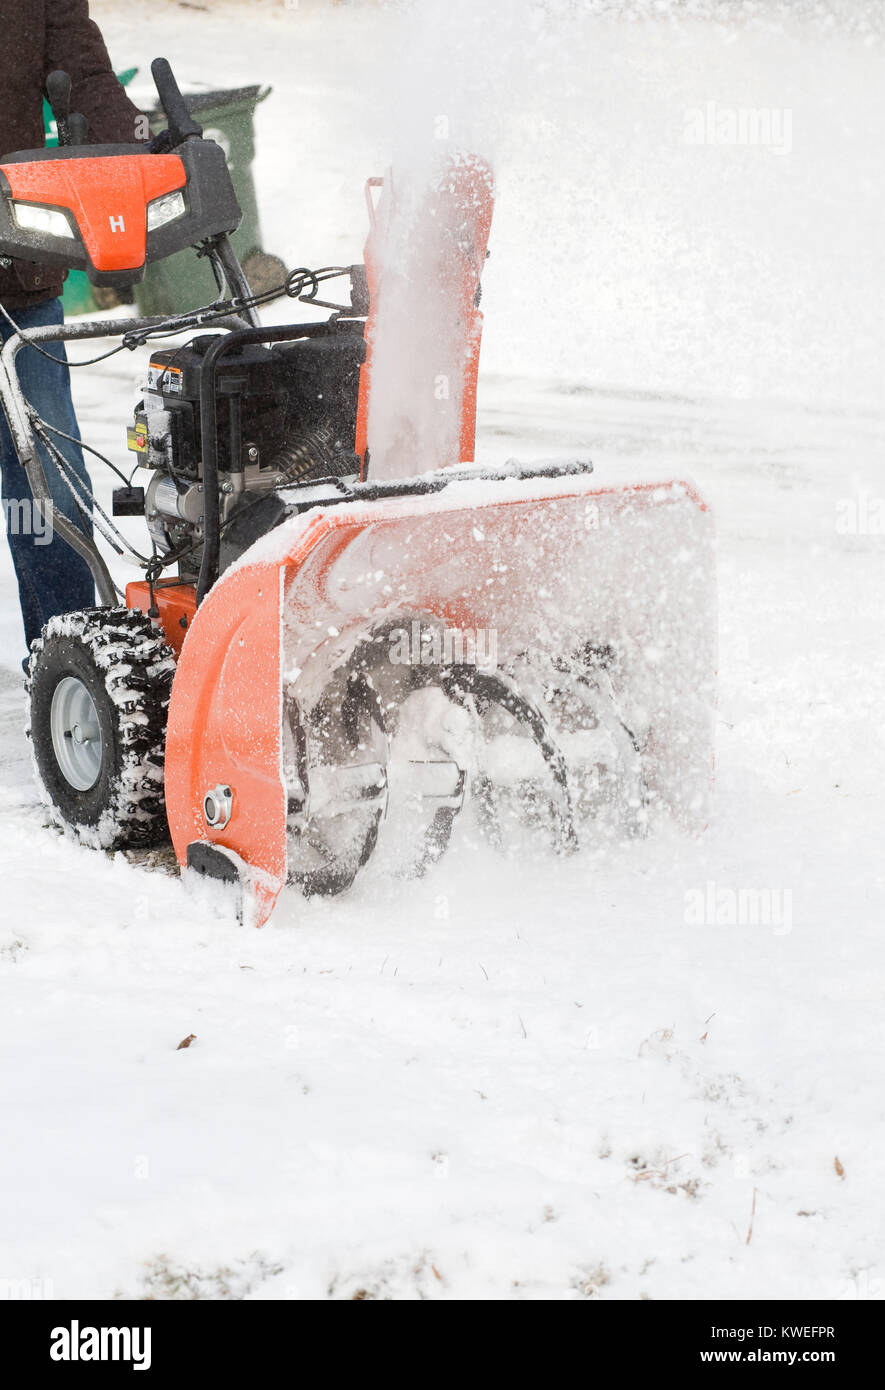 Clearing the snow using a home snow blower. Stock Photo